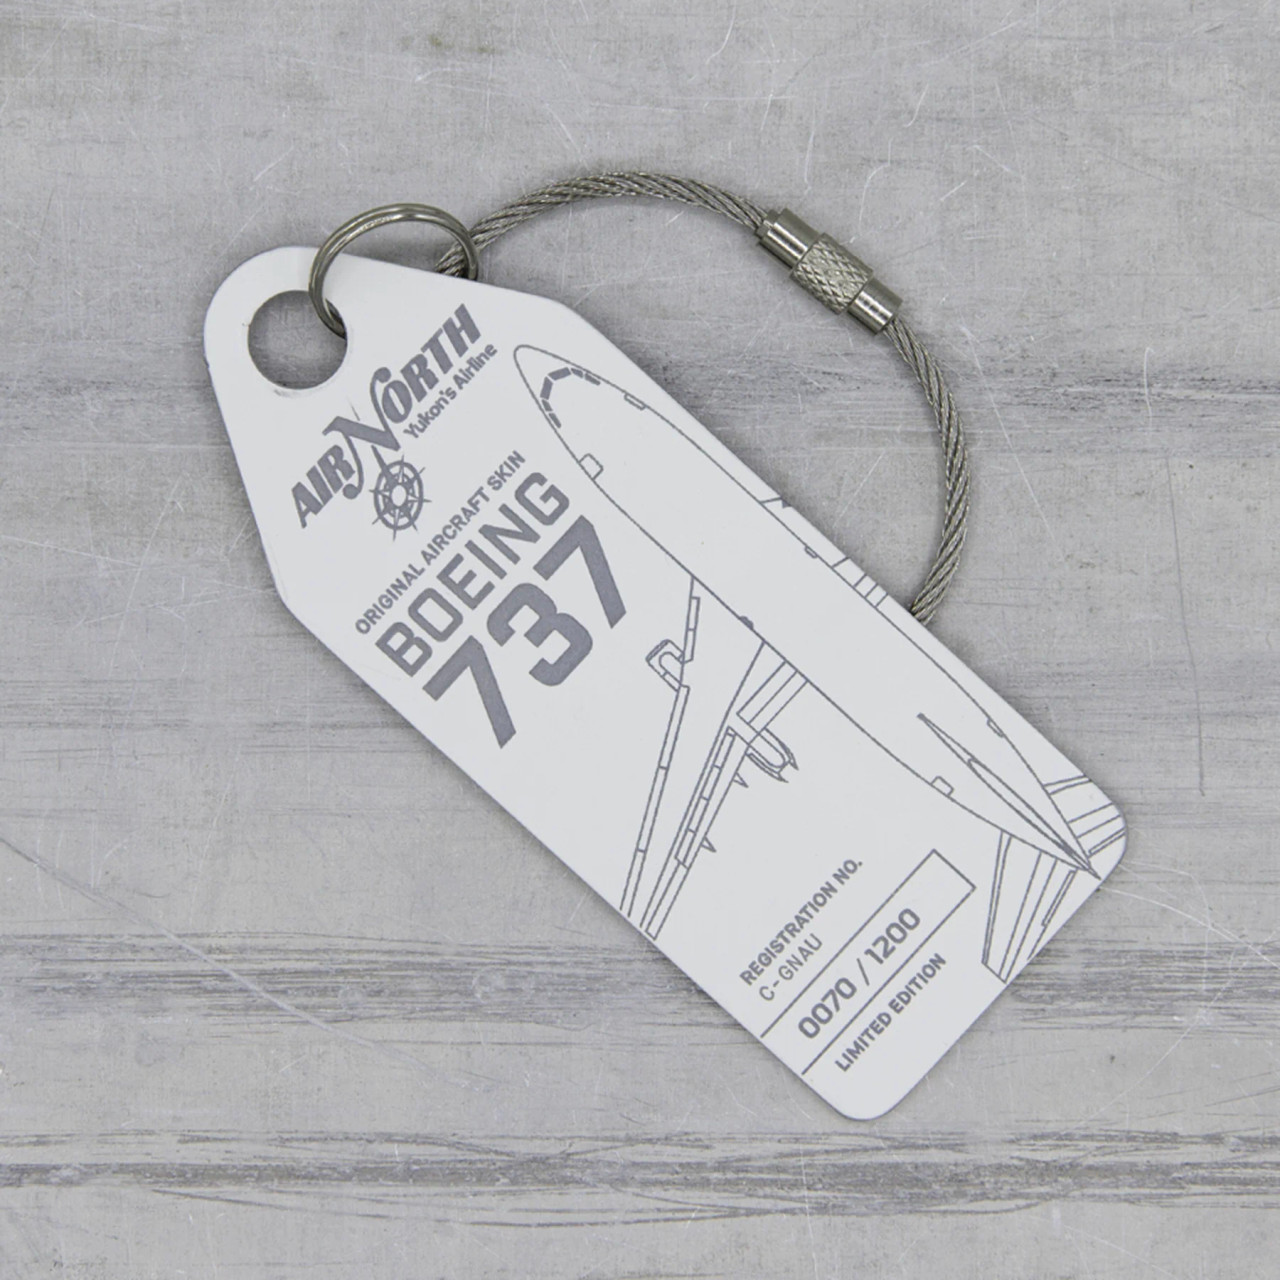 AviationTag Air North Boeing 737 Tag - White